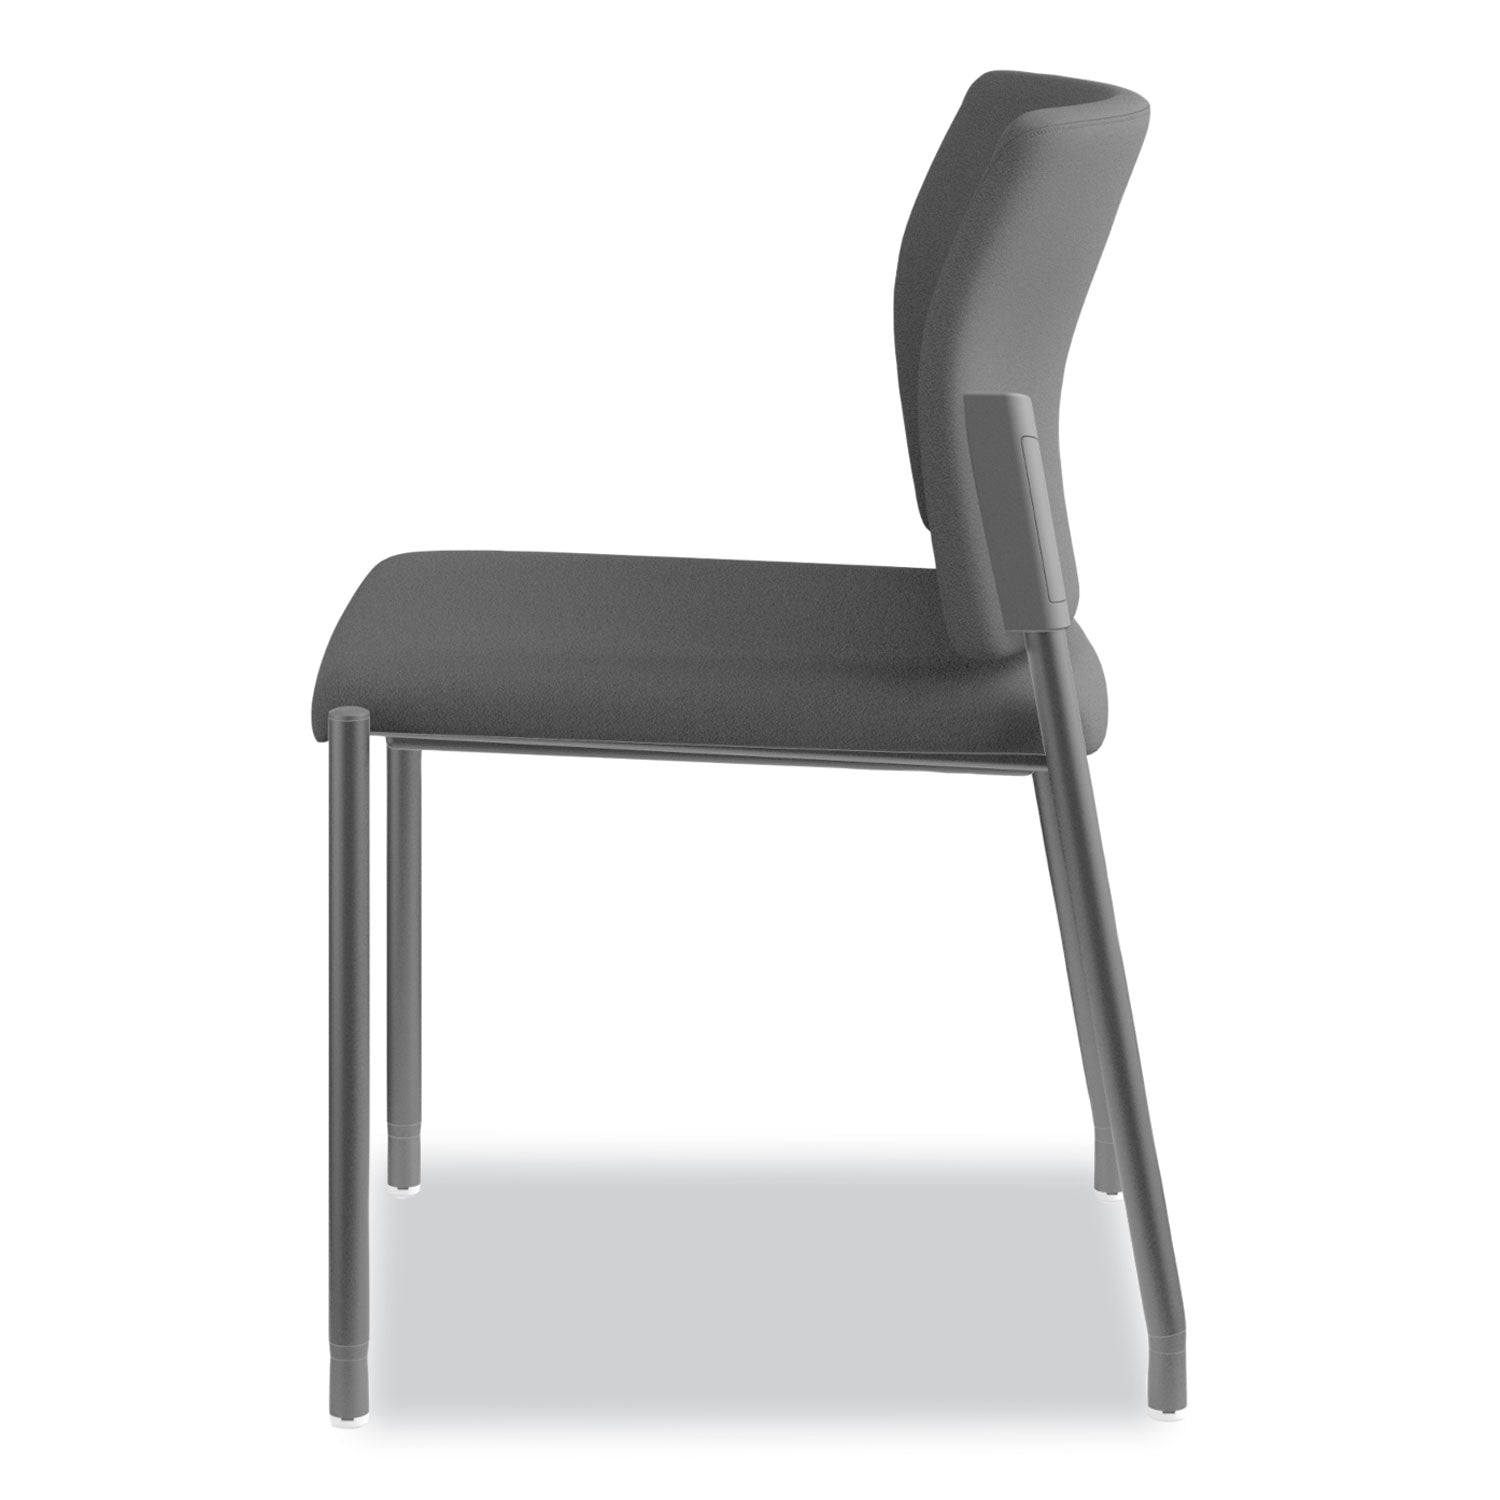 accommodate-series-guest-chair-fabric-upholstery-235-x-2225-x-315-black-seat-back-textured-black-base-2-carton_honsgs6nbcu10ck - 2